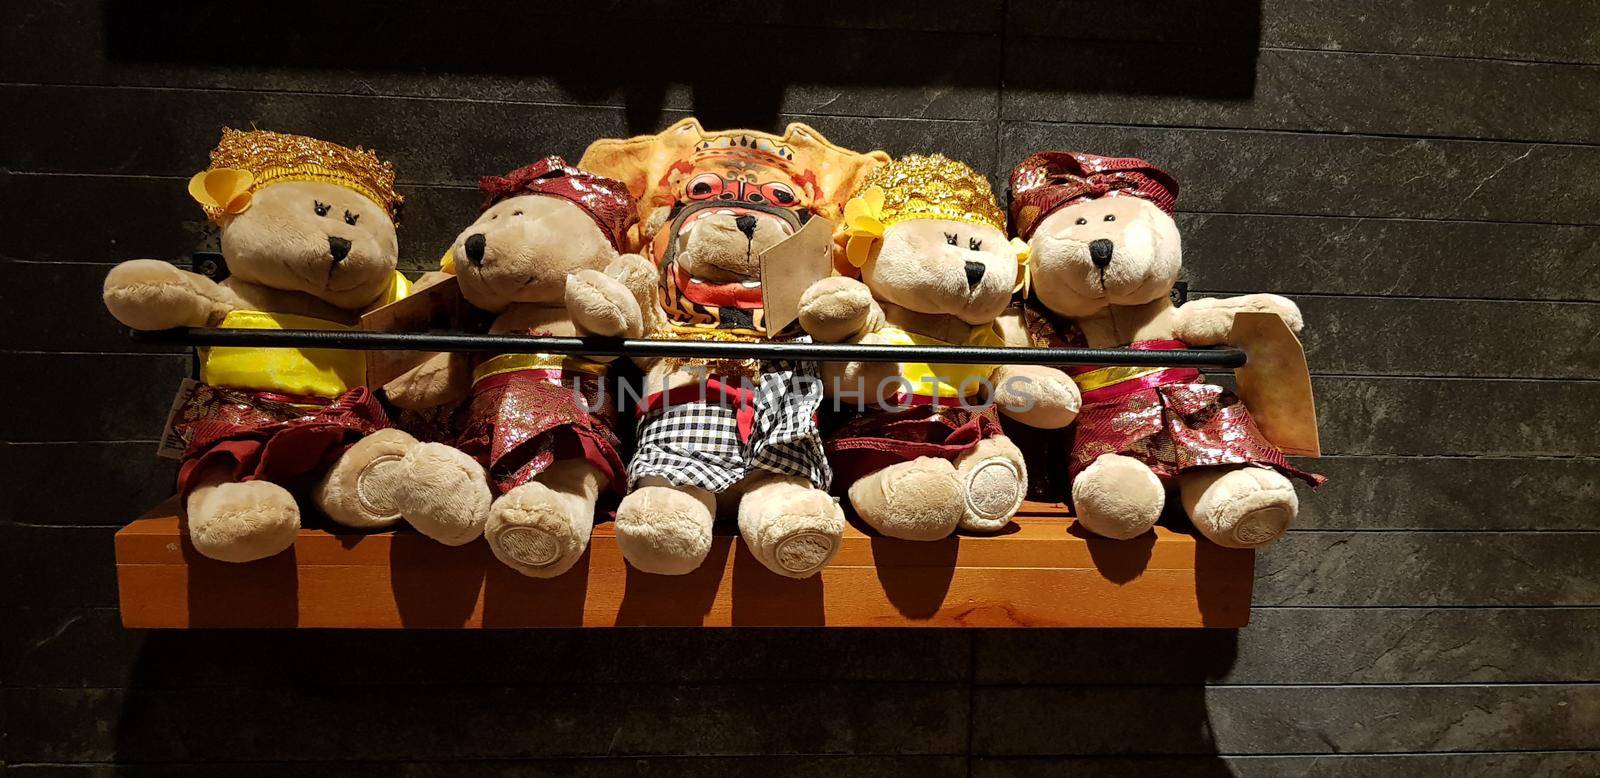 Group of Fluffy Stuffed Bear Toys Wearing various Clothes, teddy bear stuffed animal by antoksena